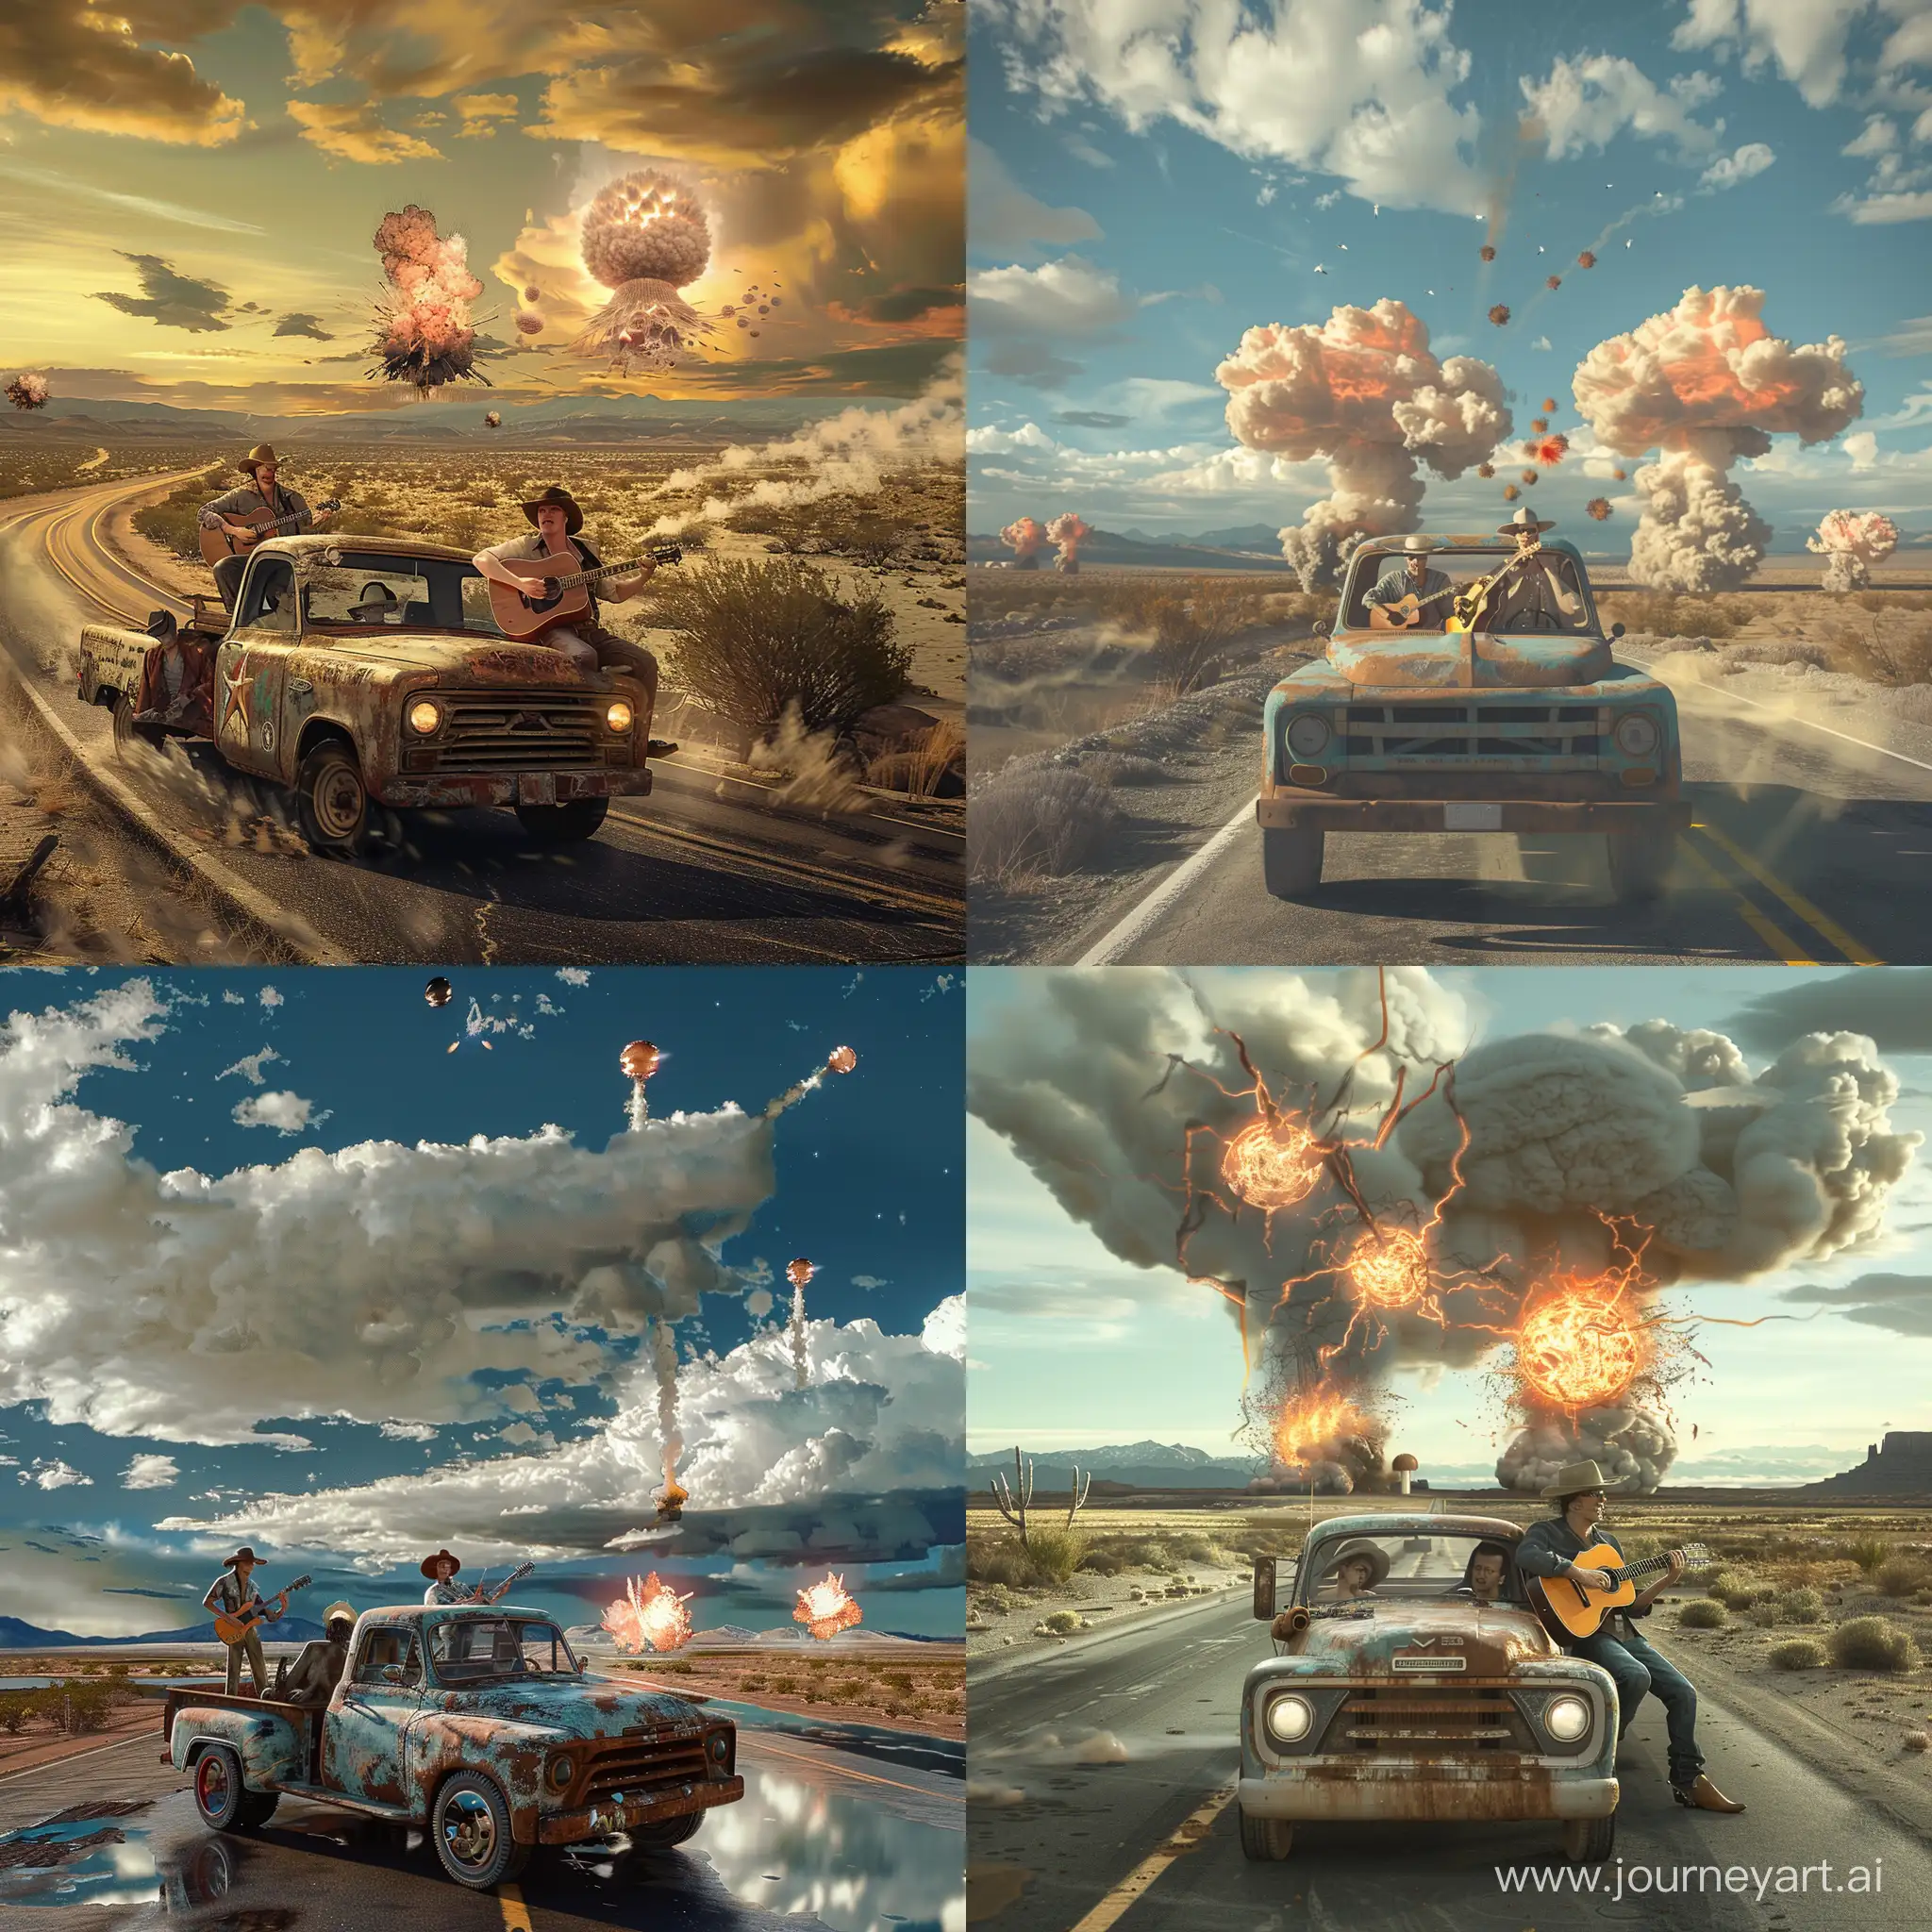 photo-realistic,  an old beat up pick up truck drives down a desolate dessert highway ,two skinny cowboys are playing guitar in the back of the truck ,in the background nuclear mushroom clouds are exploding in the distance, atmospheric lighting